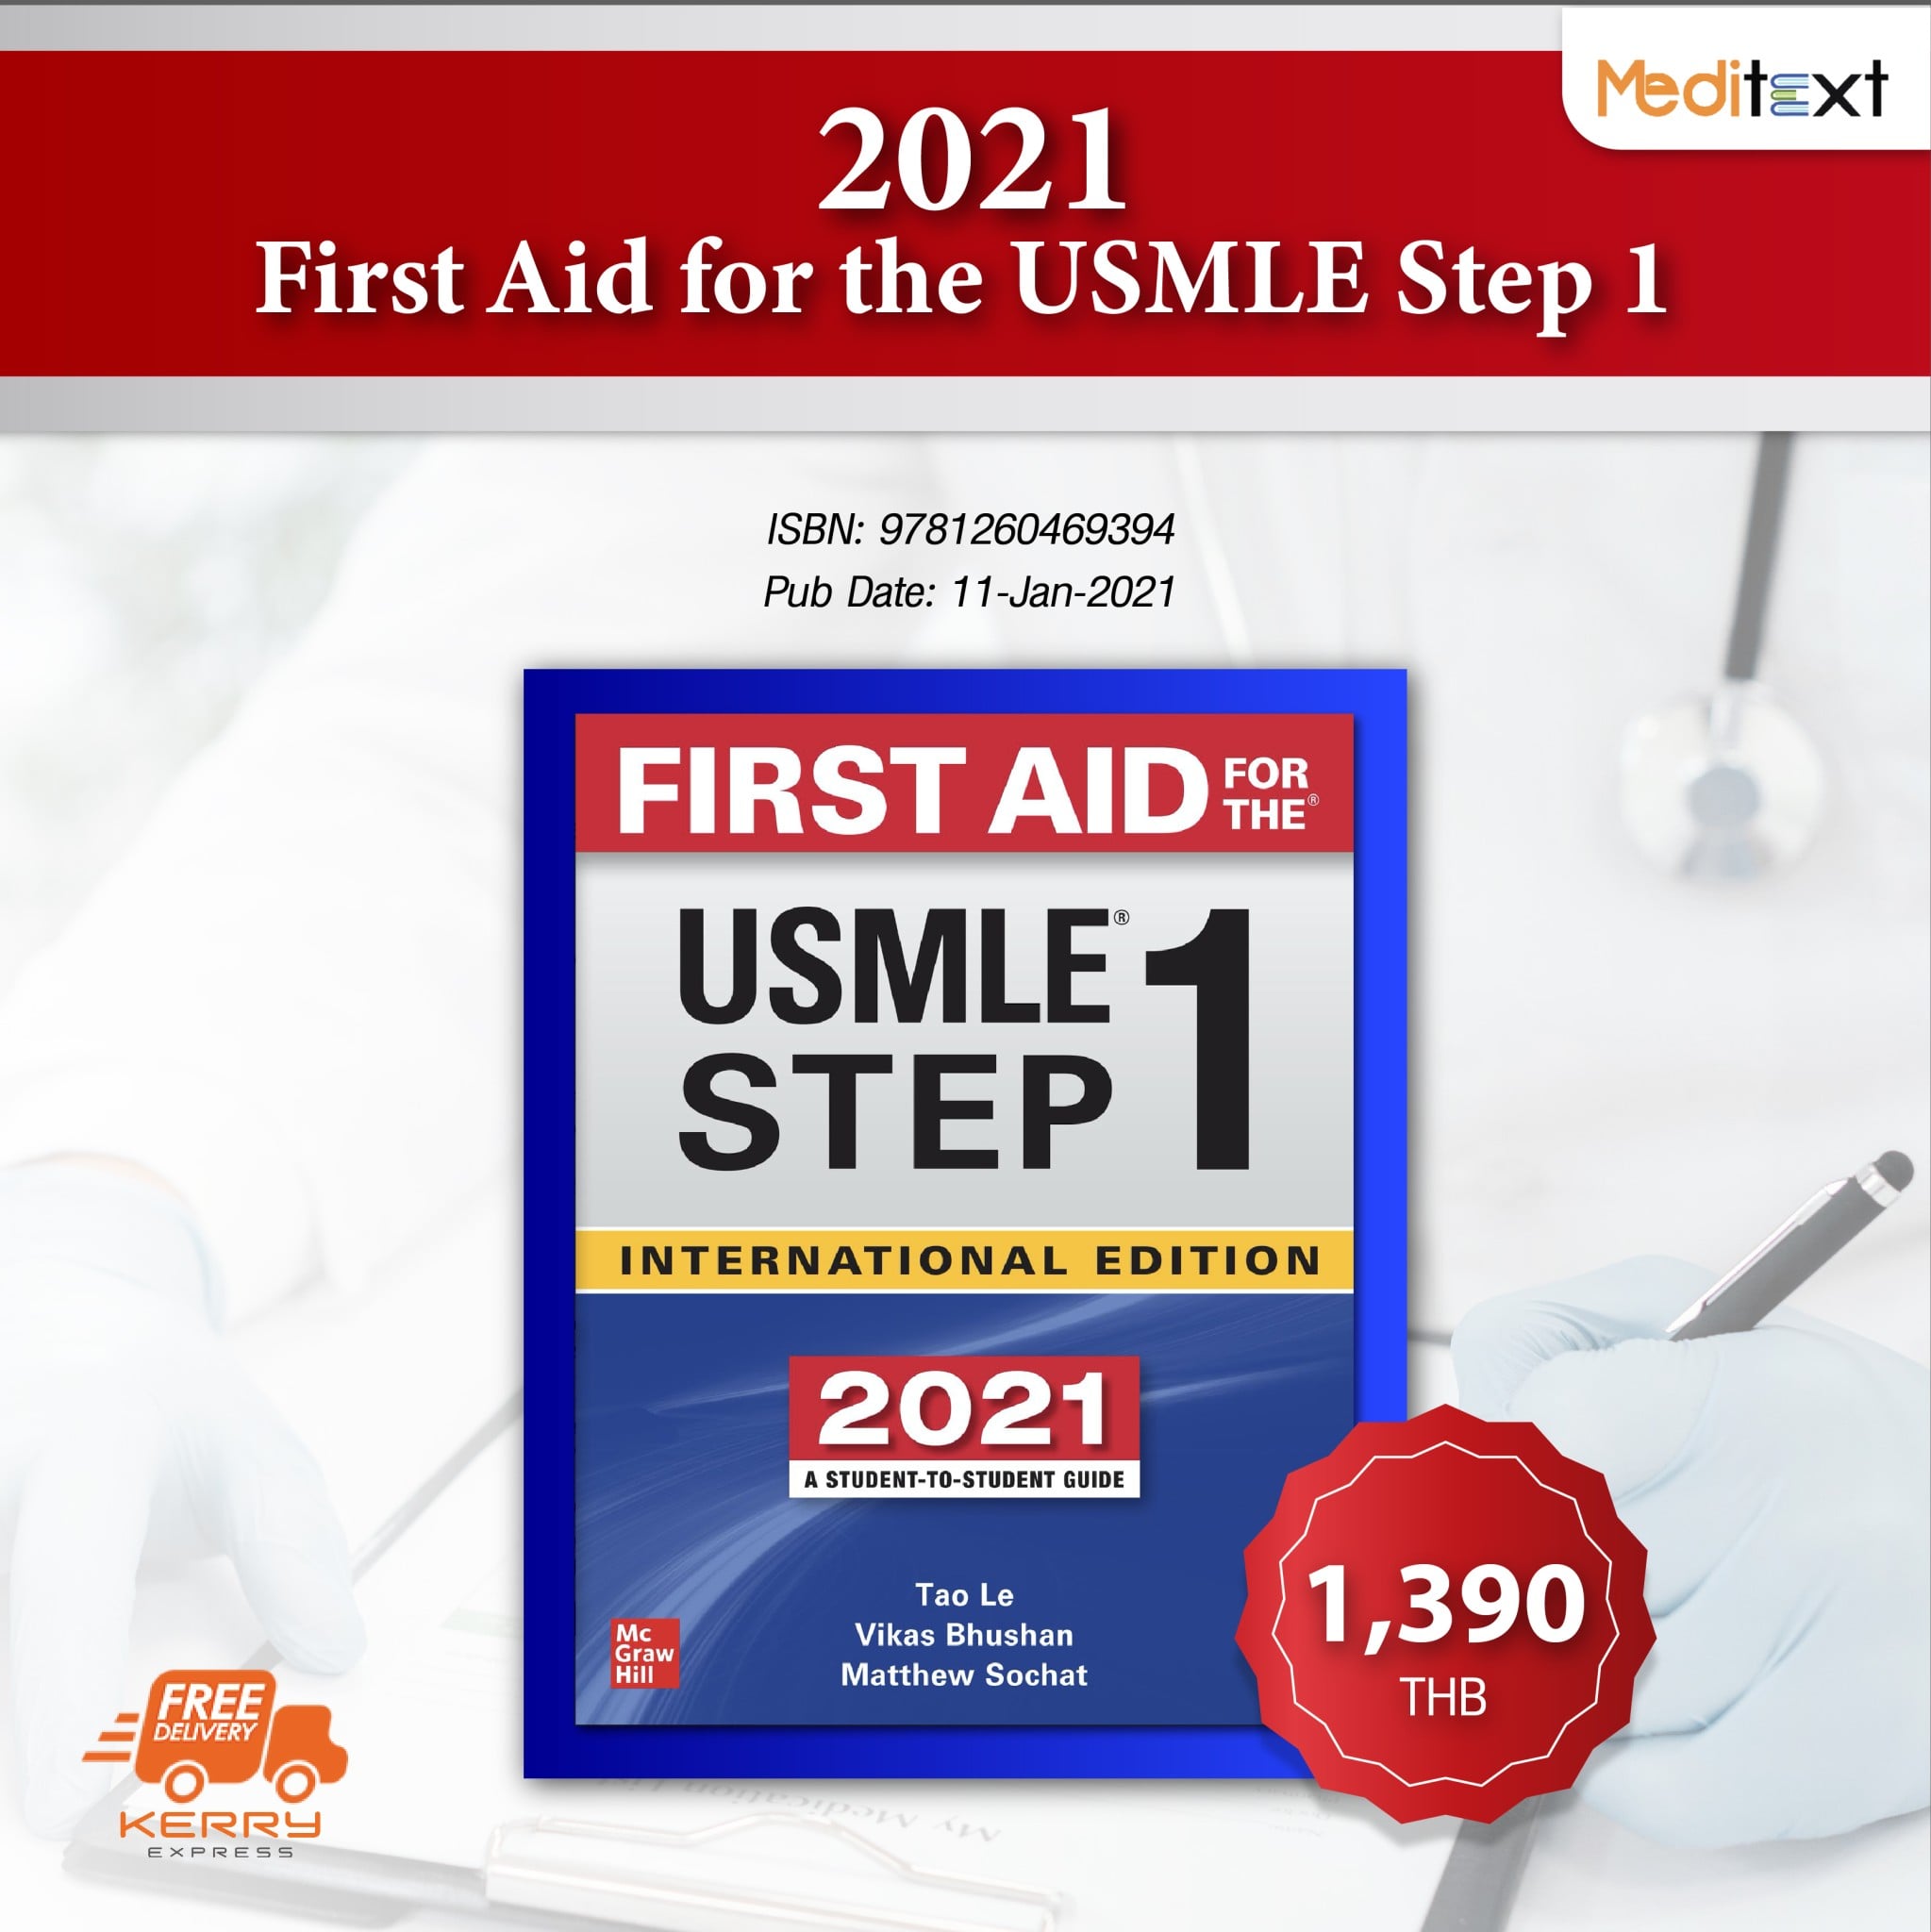 2021 First Aid for USMLE Step 1, 31ed - ISBN : 9781260469394 - Meditext